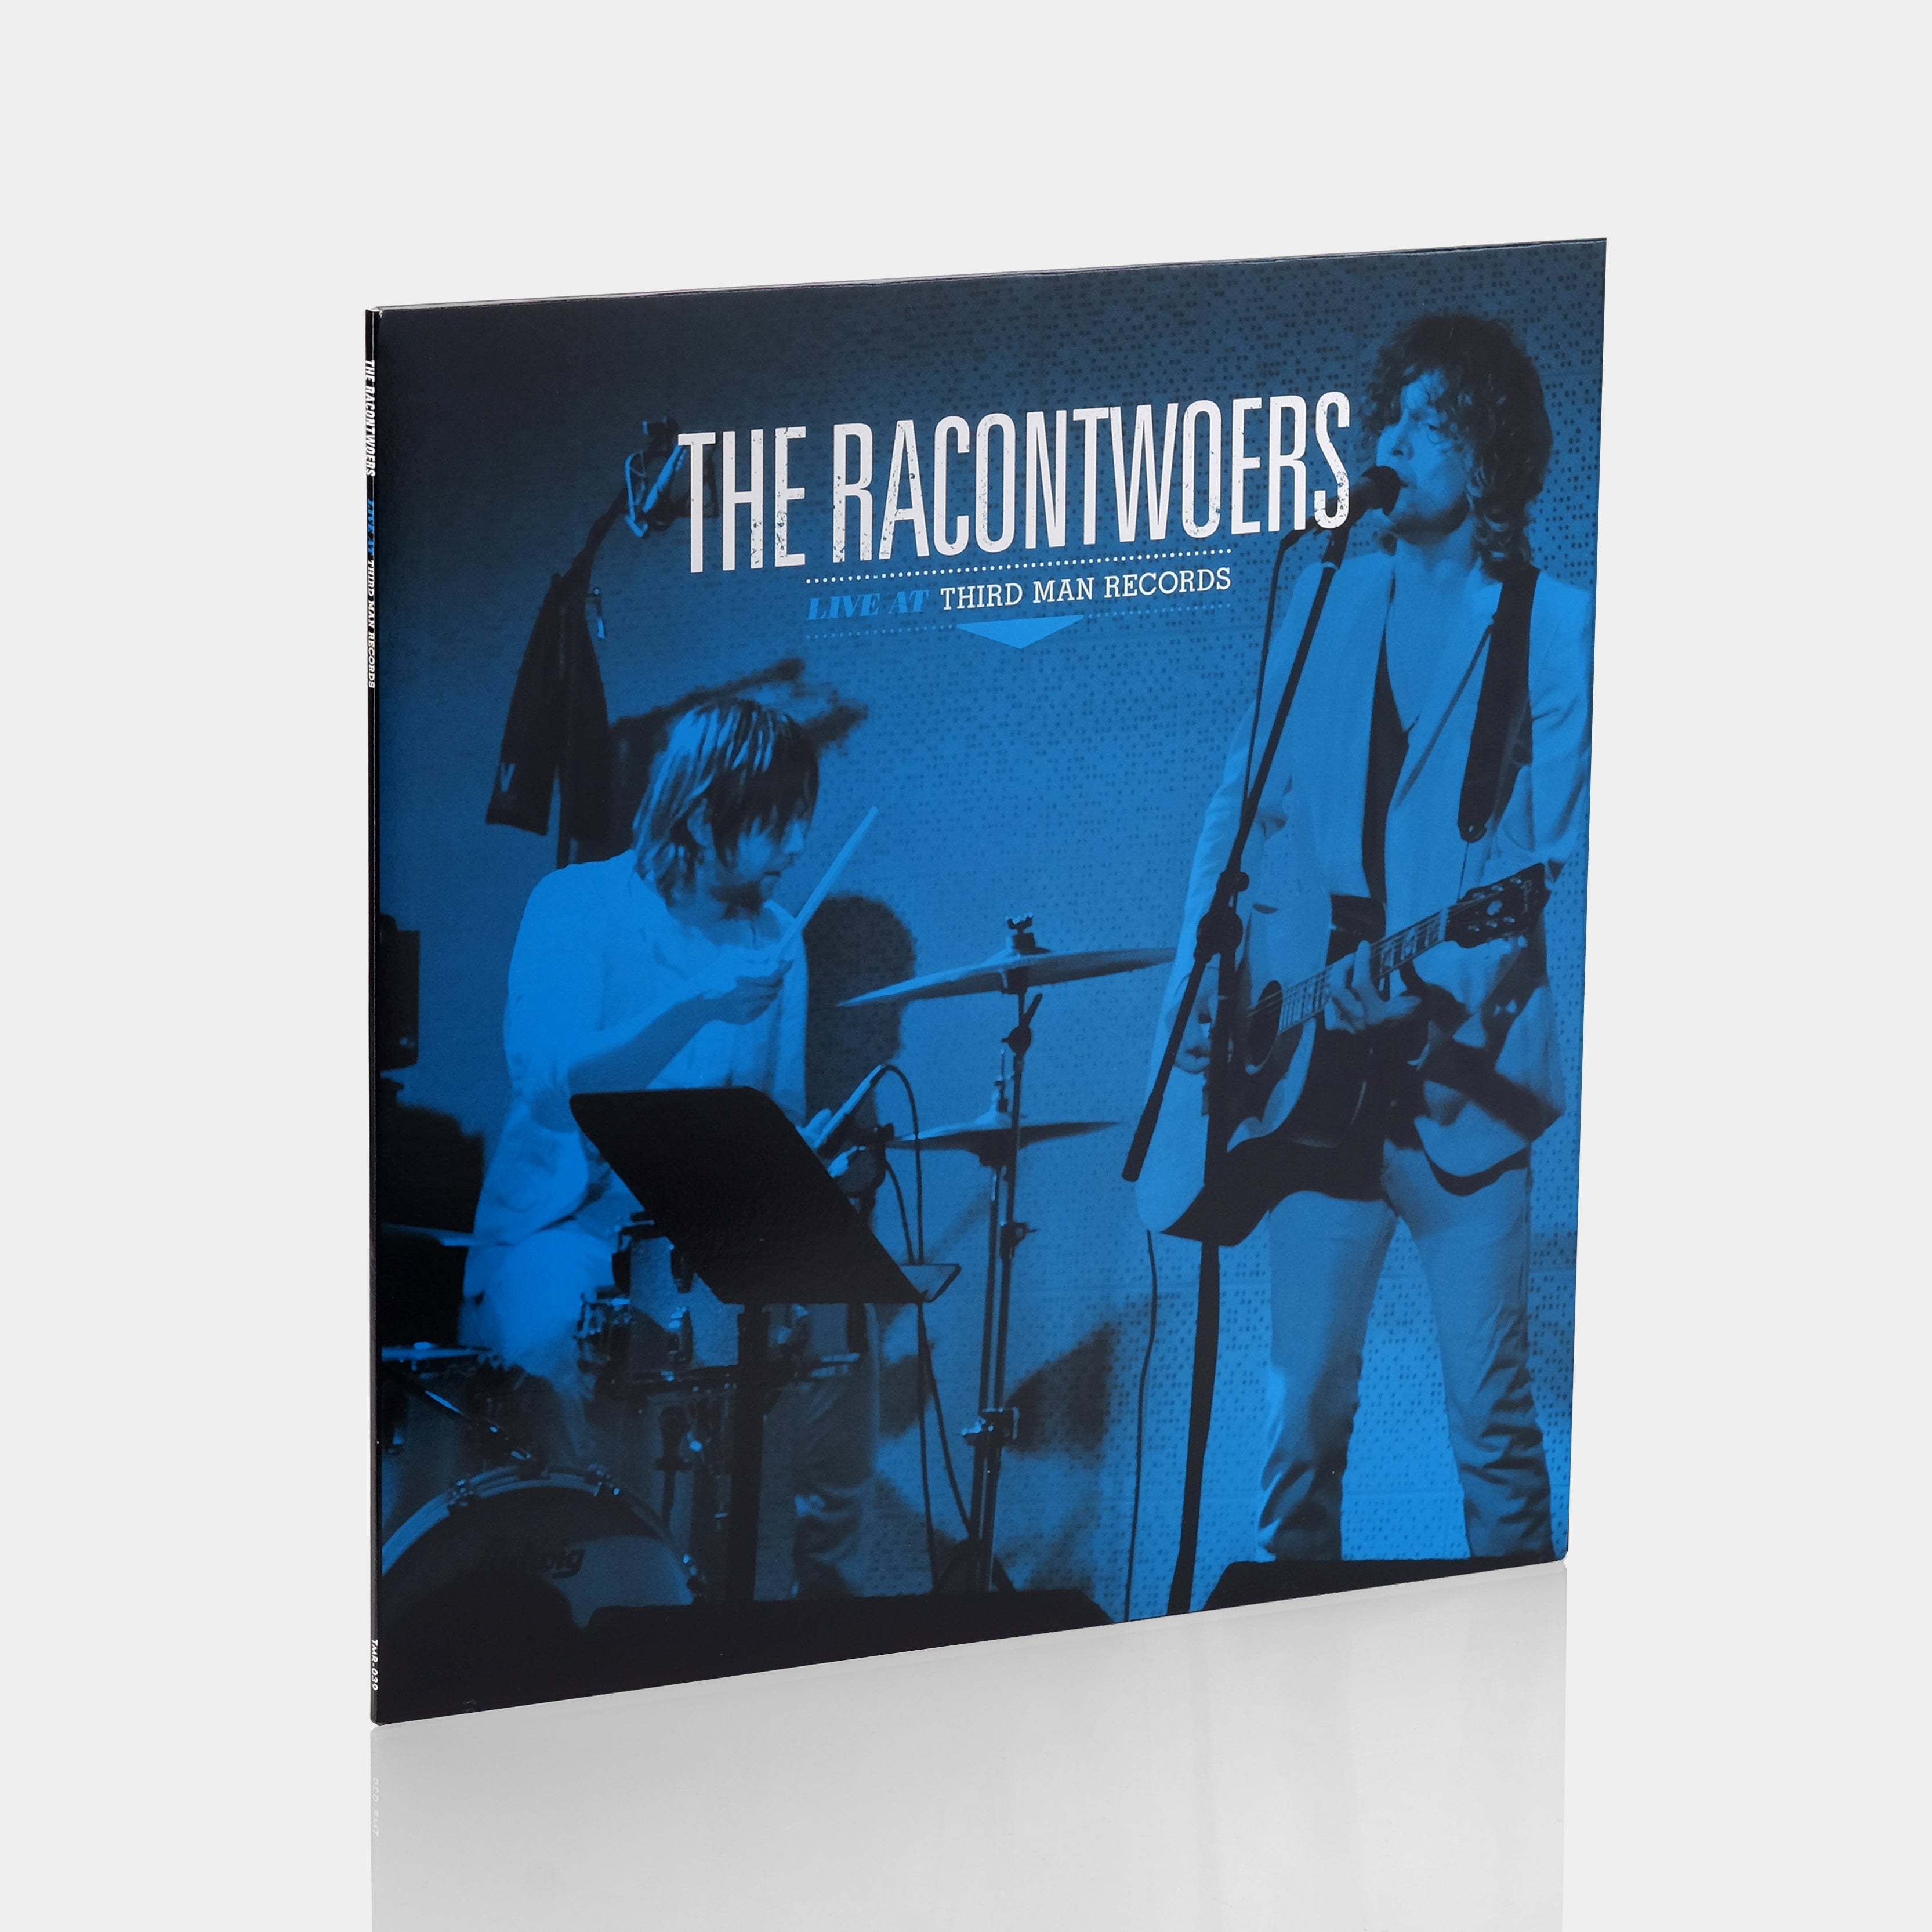 The Racontwoers - Live At Third Man Records LP Vinyl Record